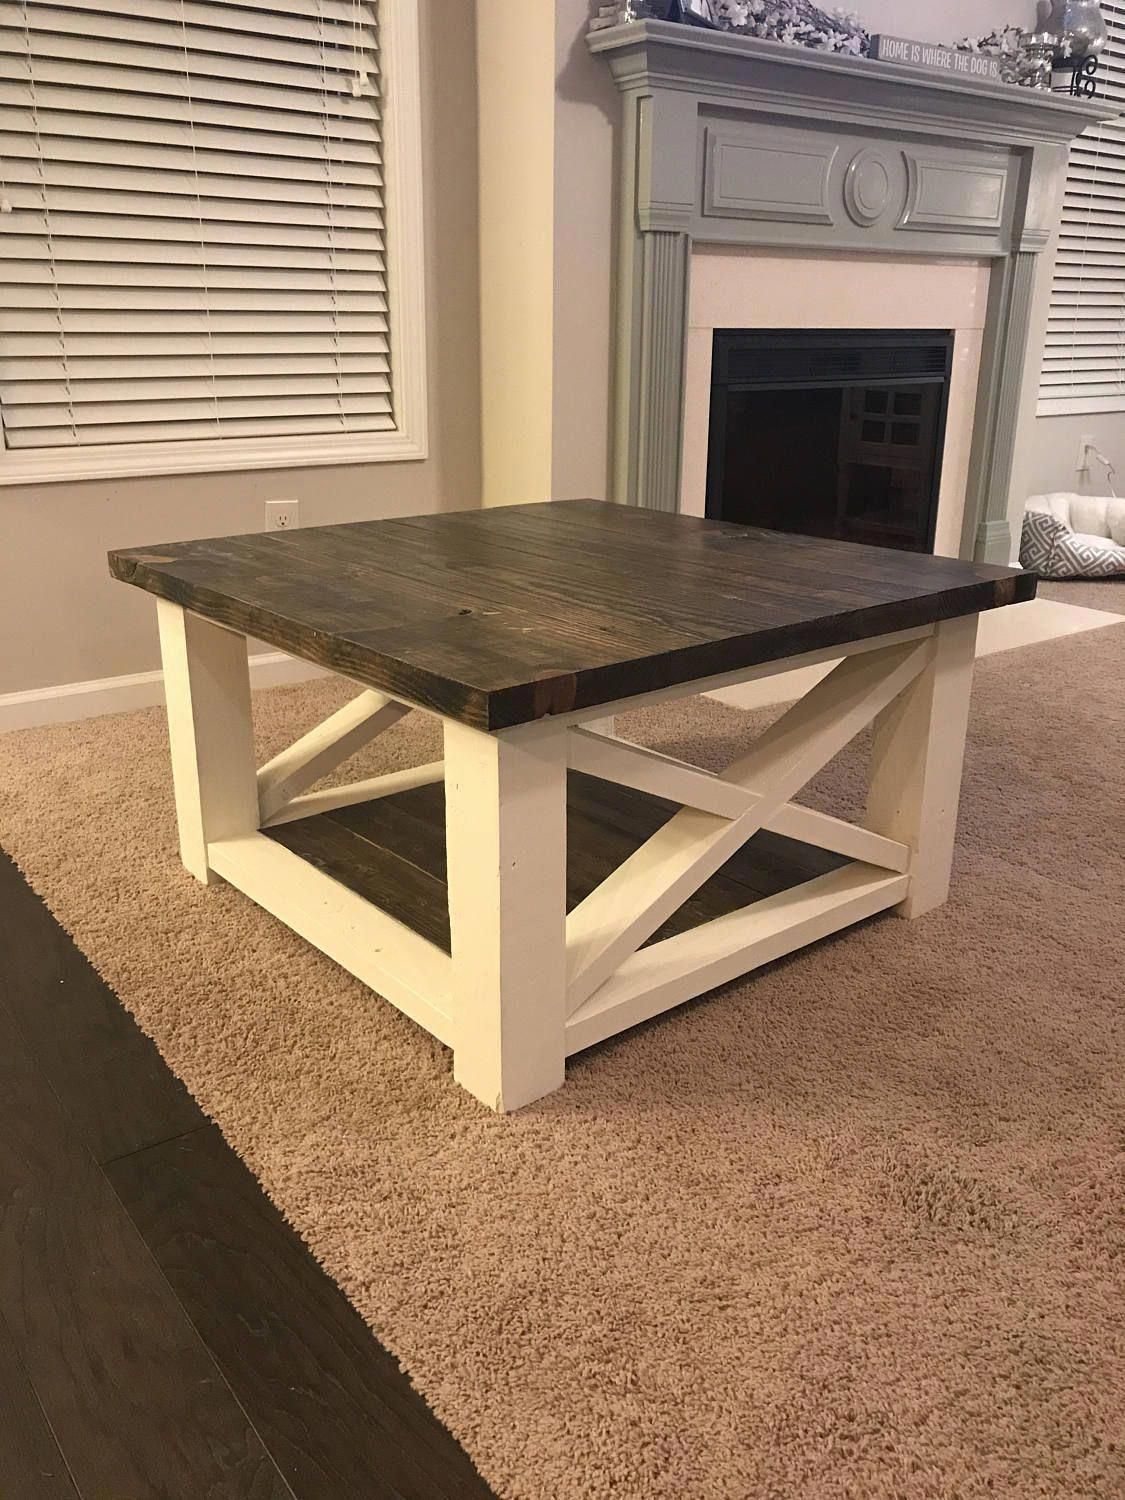 Farmhouse Coffee Table | Rustic Coffee Table | Solid Wood Farmhouse Coffee Table | Built to Order - Farmhouse Coffee Table | Rustic Coffee Table | Solid Wood Farmhouse Coffee Table | Built to Order -   18 diy Table stand ideas